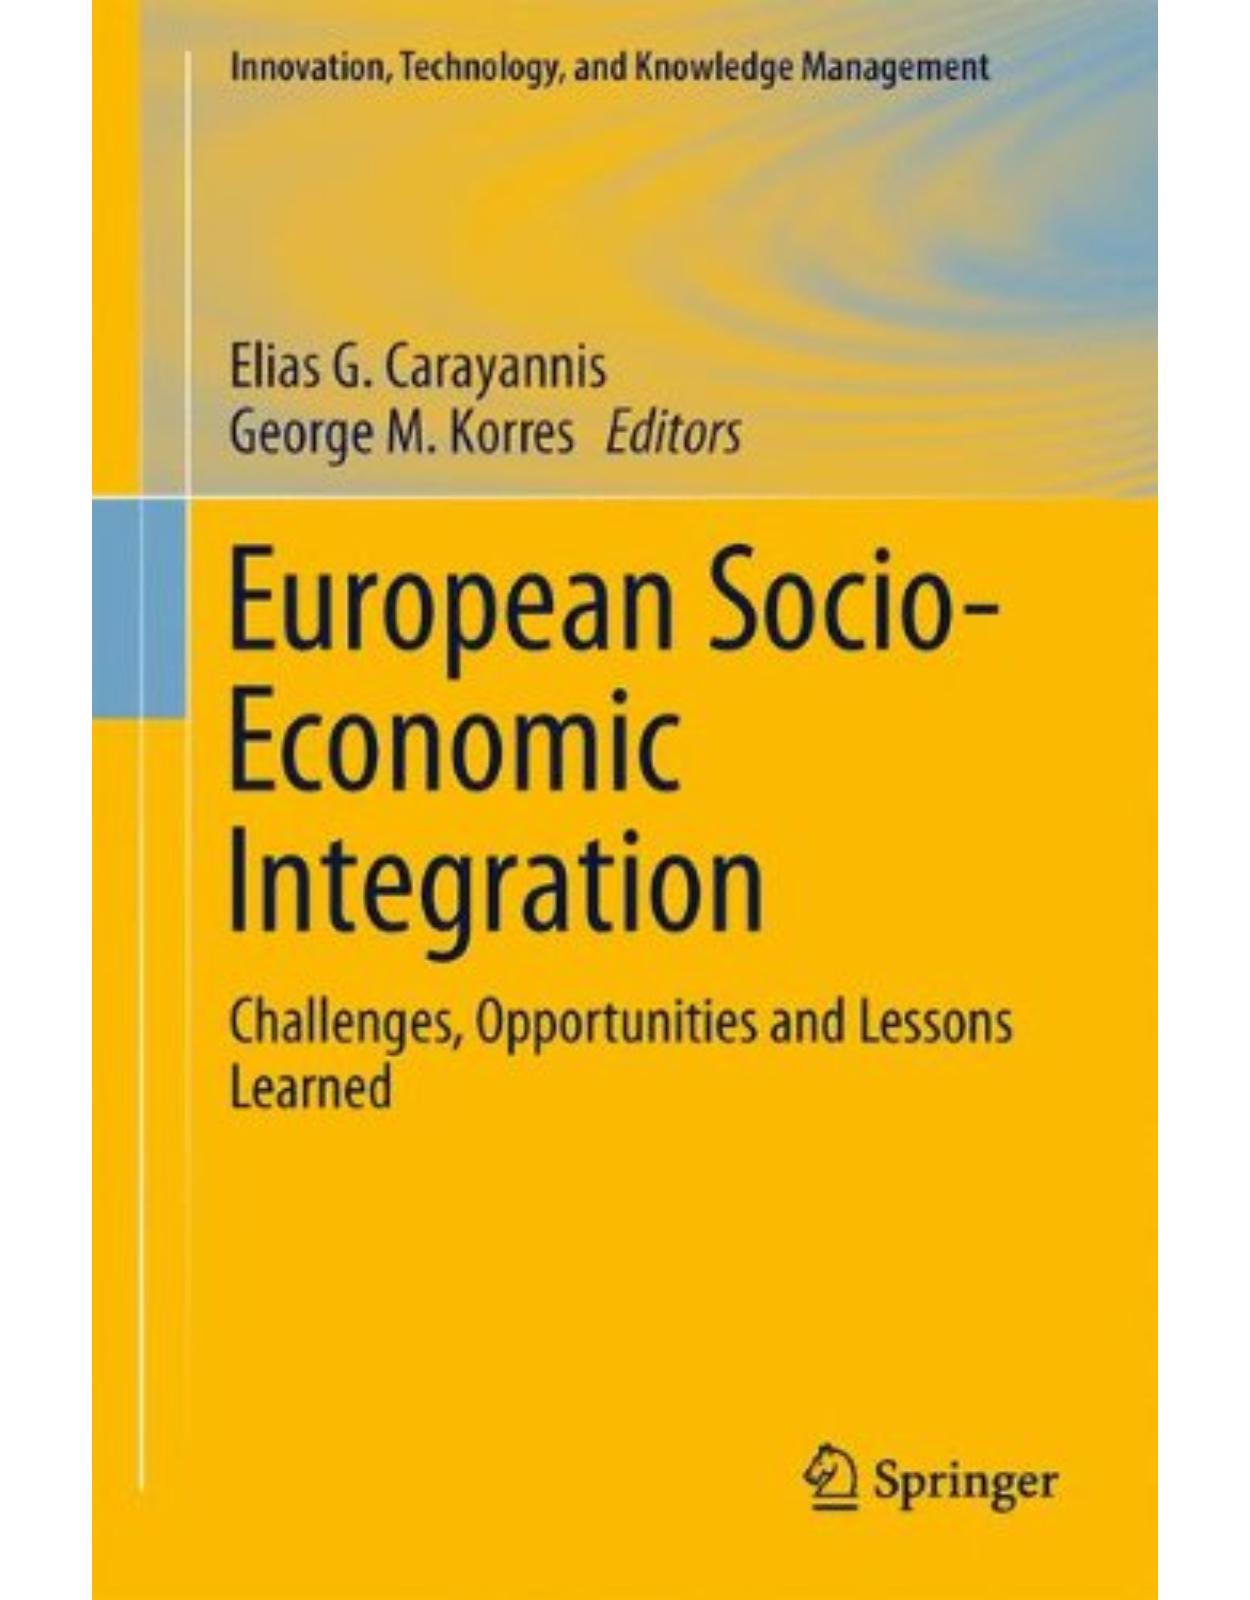 European Socio-Economic Integration: Challenges, Opportunities and Lessons Learned (Innovation, Technology, and Knowledge Management) 